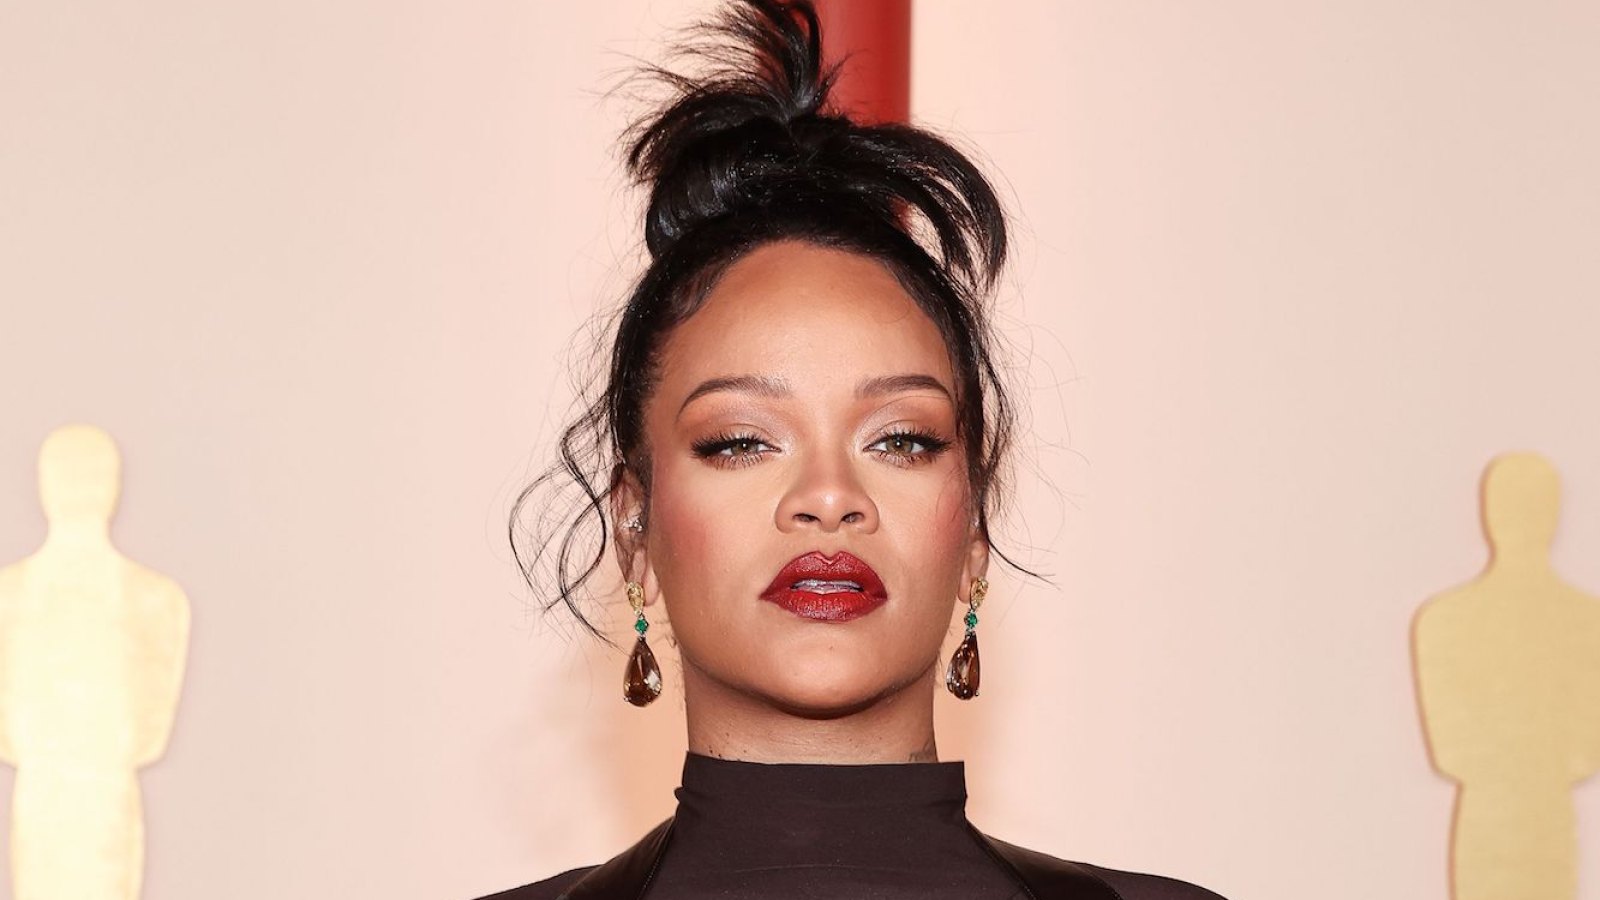 Pregnant Rihanna Sparks Speculation That She and Boyfriend ASAP Rocky Are Expecting Baby Girl